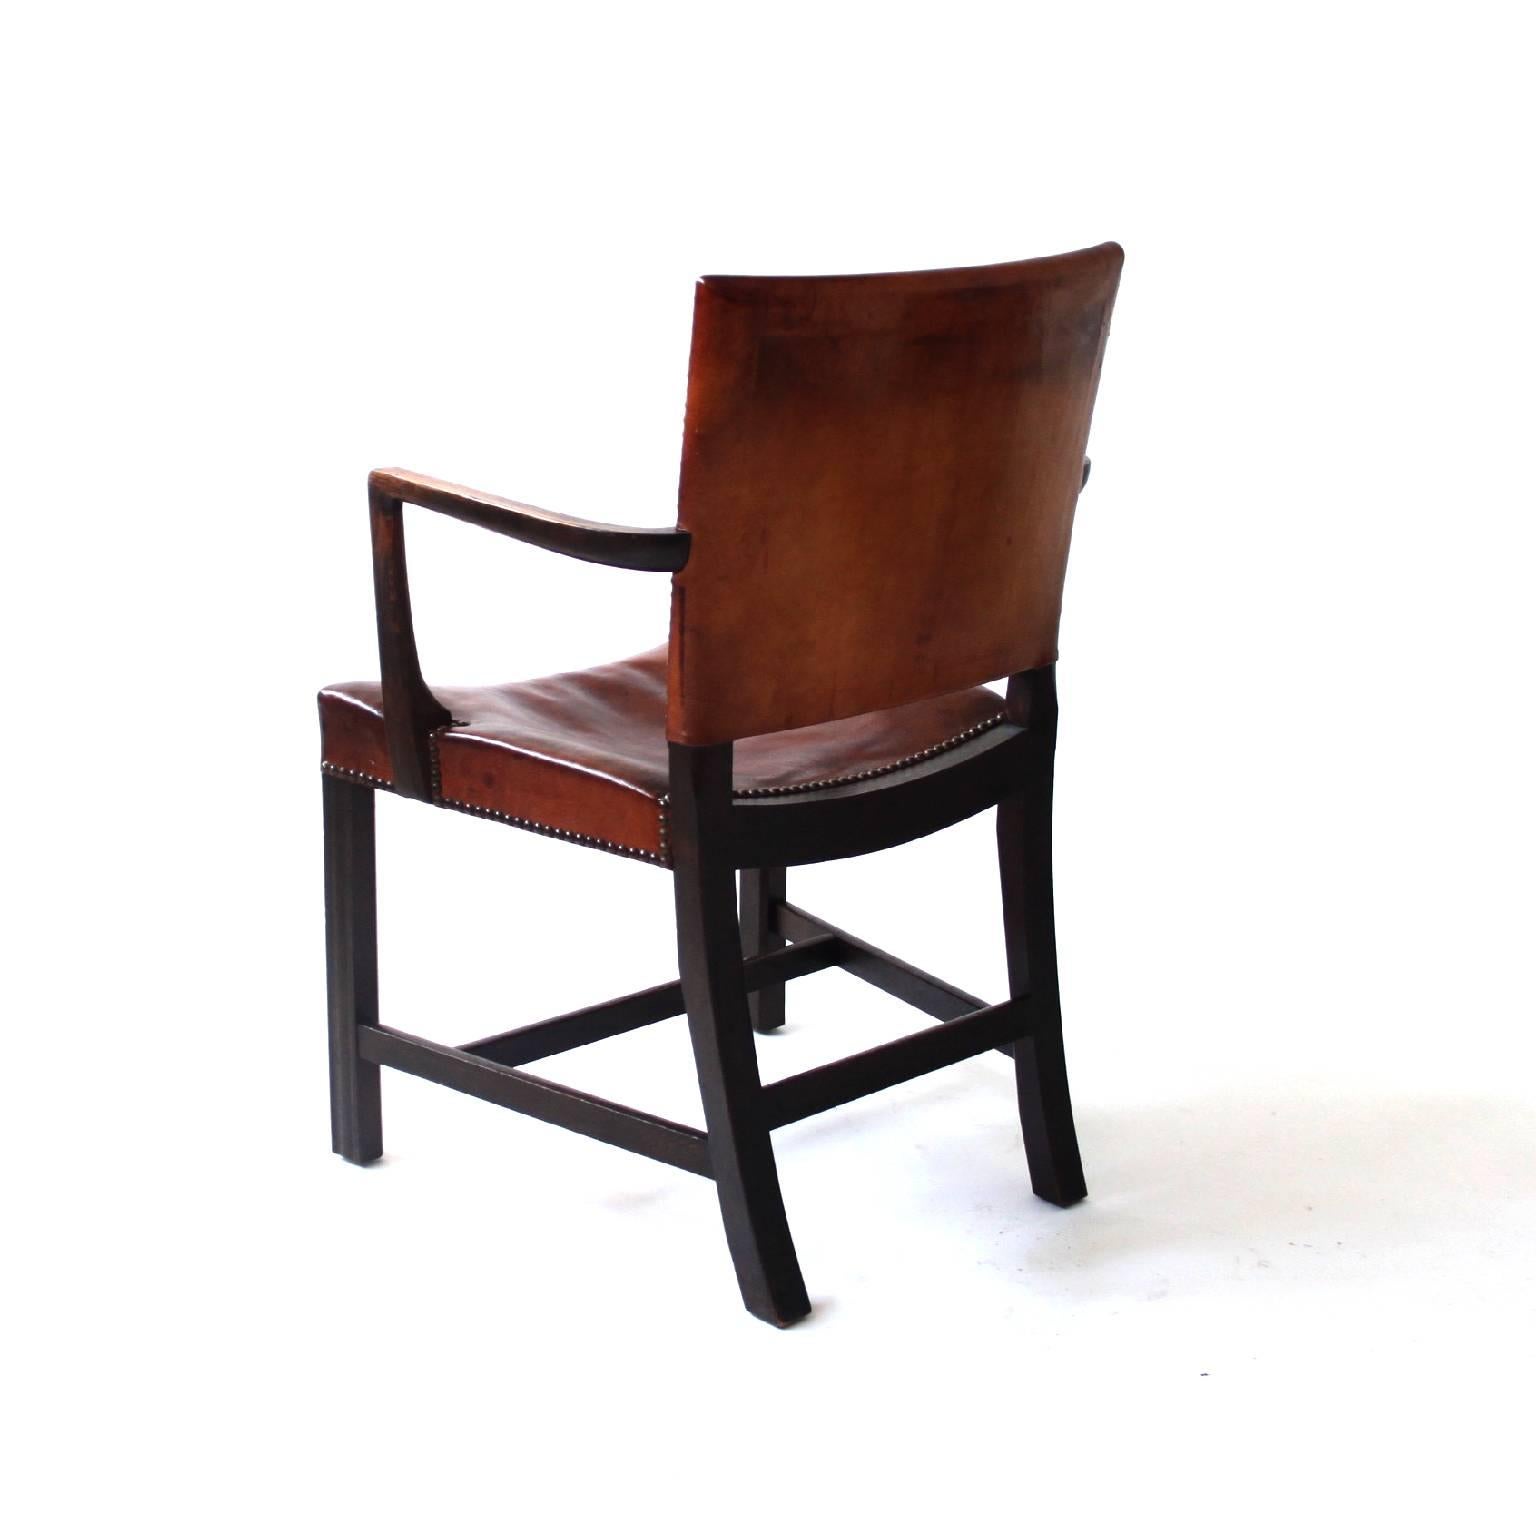 Danish Kaare Klint Armchair Dark Stained Oak and Original Patinated Niger Leather 1930s For Sale